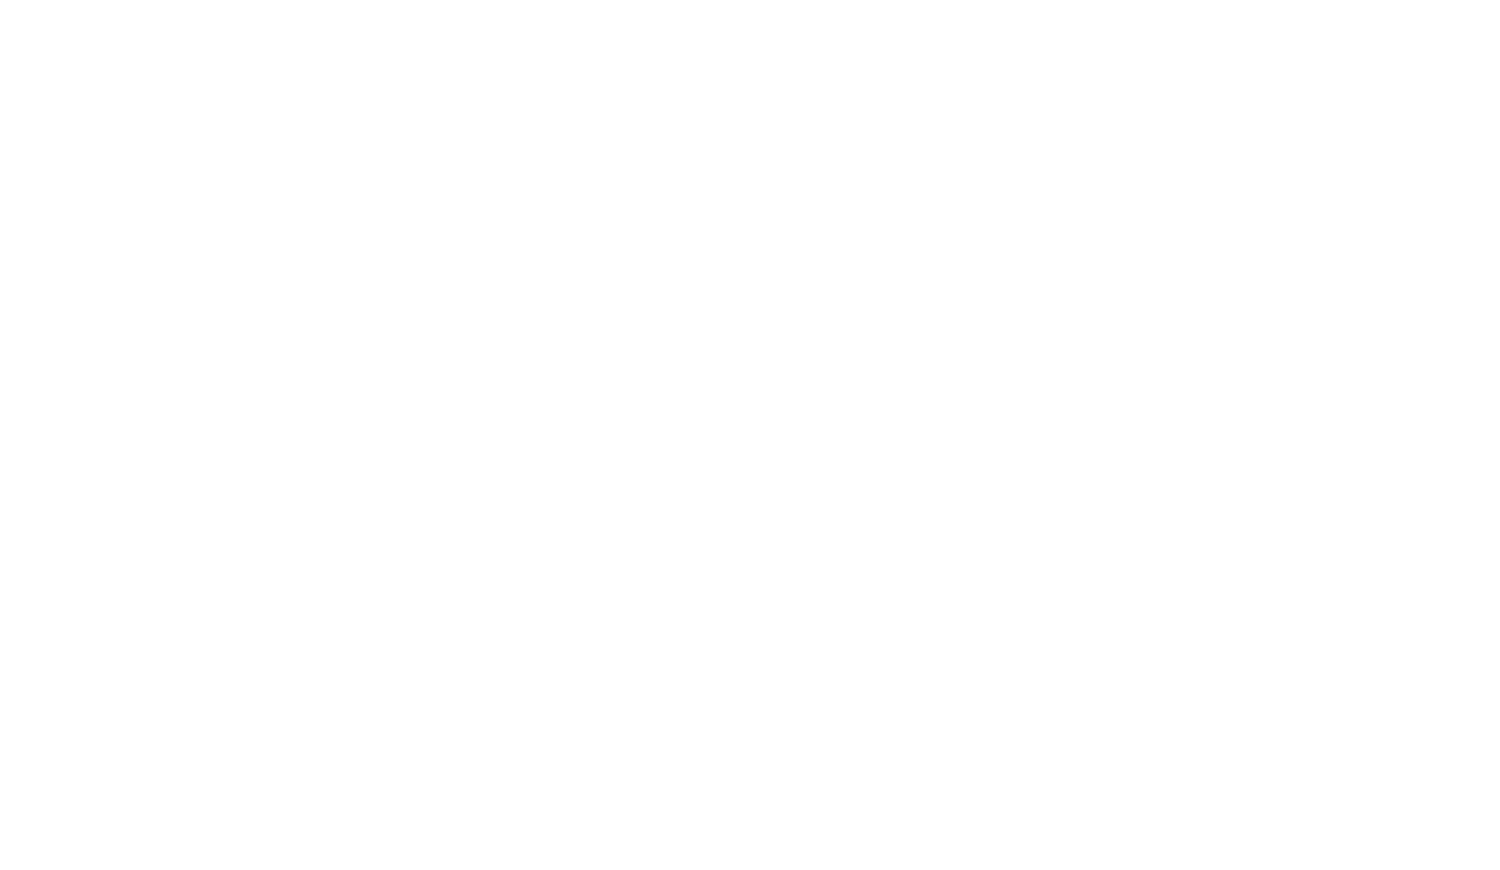 Tappo at the History Museum